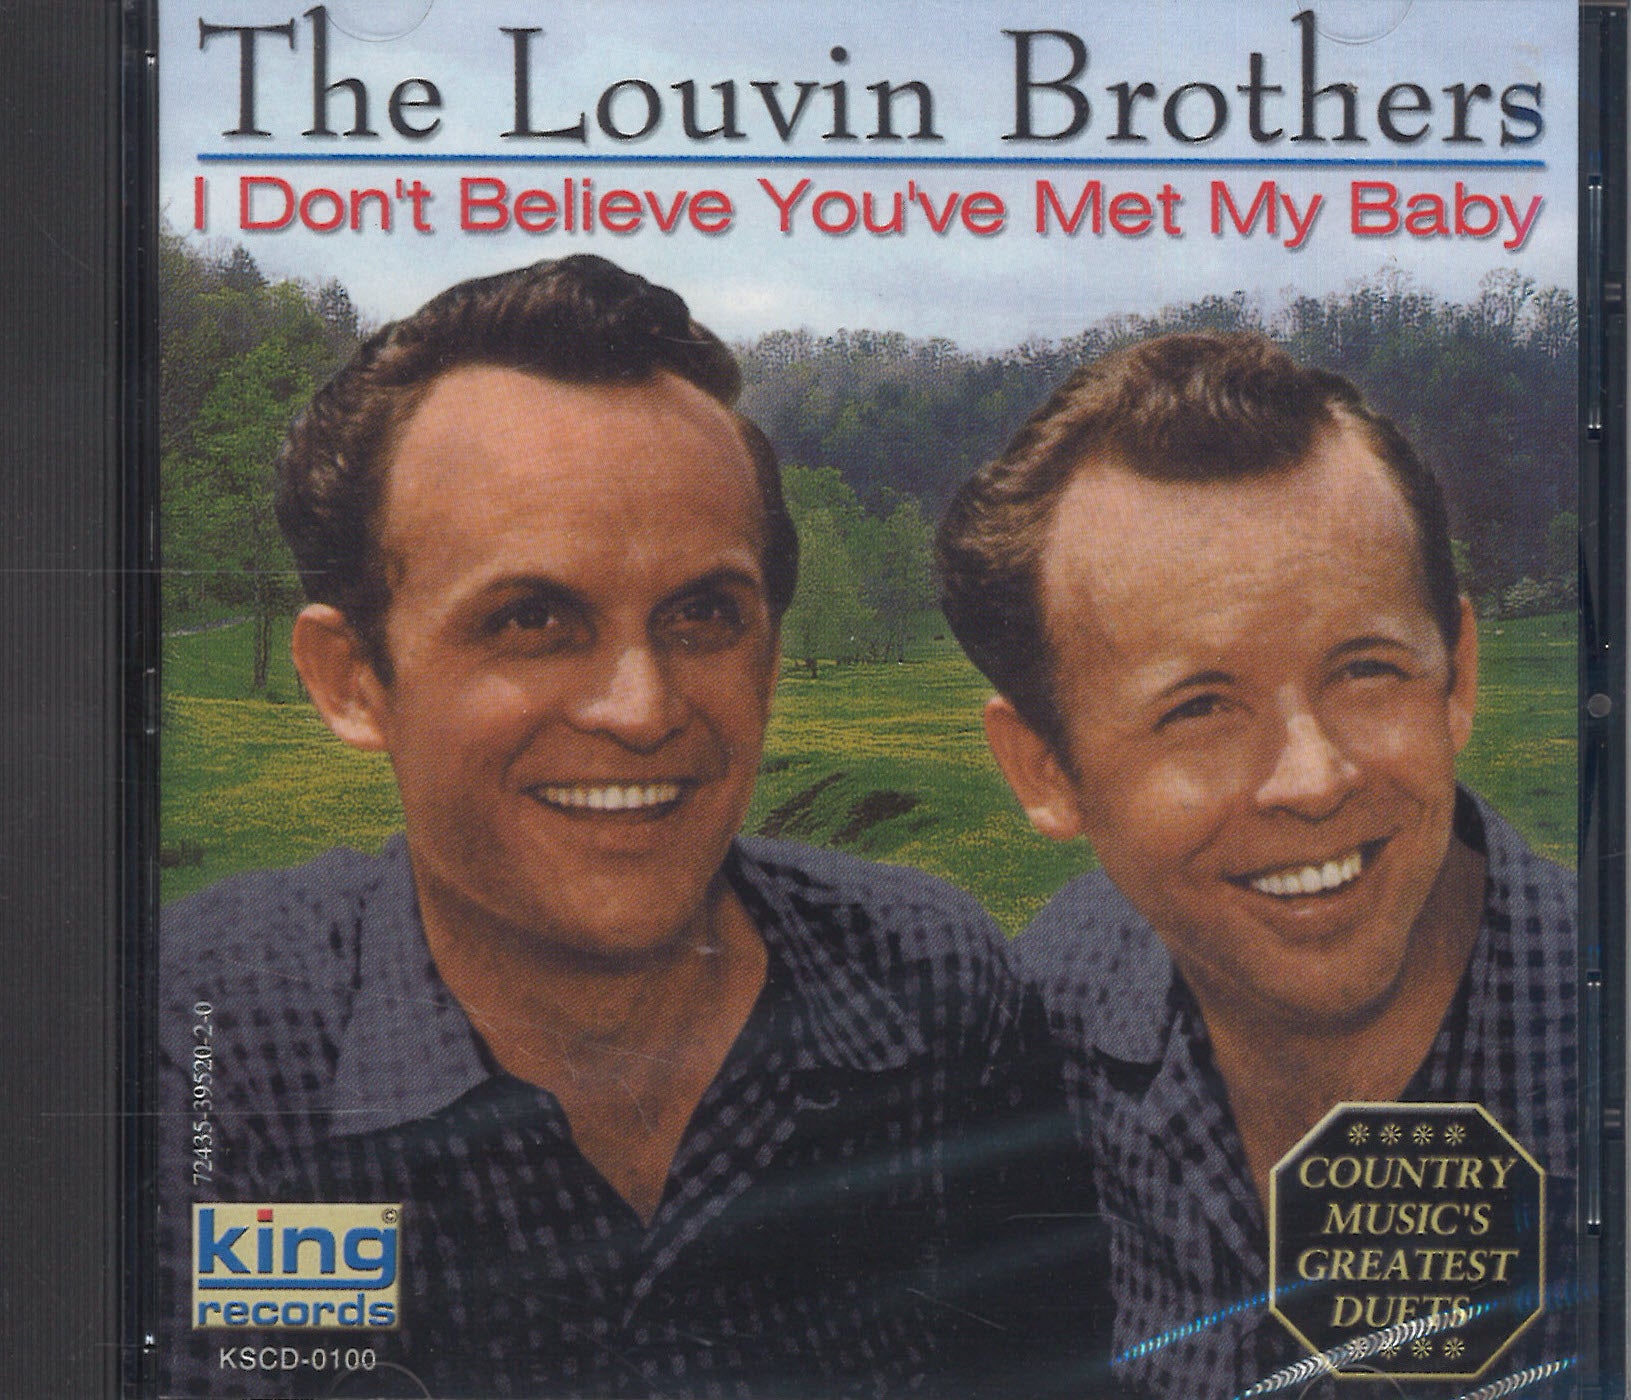 The Louvin Brothers I Don't Believe You've Met My Baby